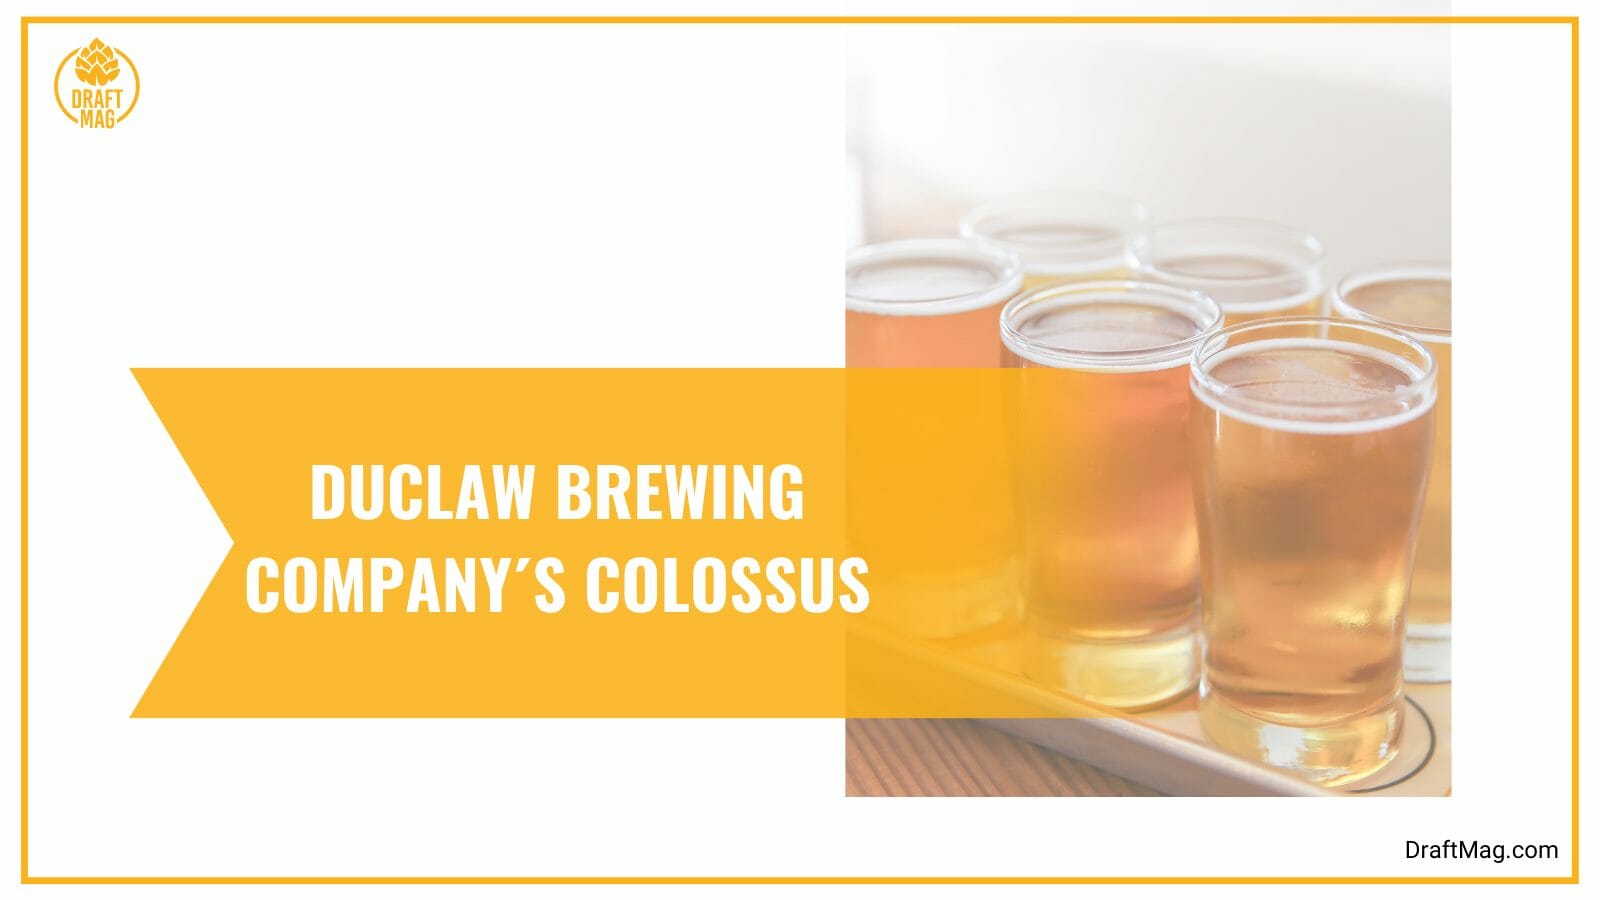 Duclaw brewing company colossus